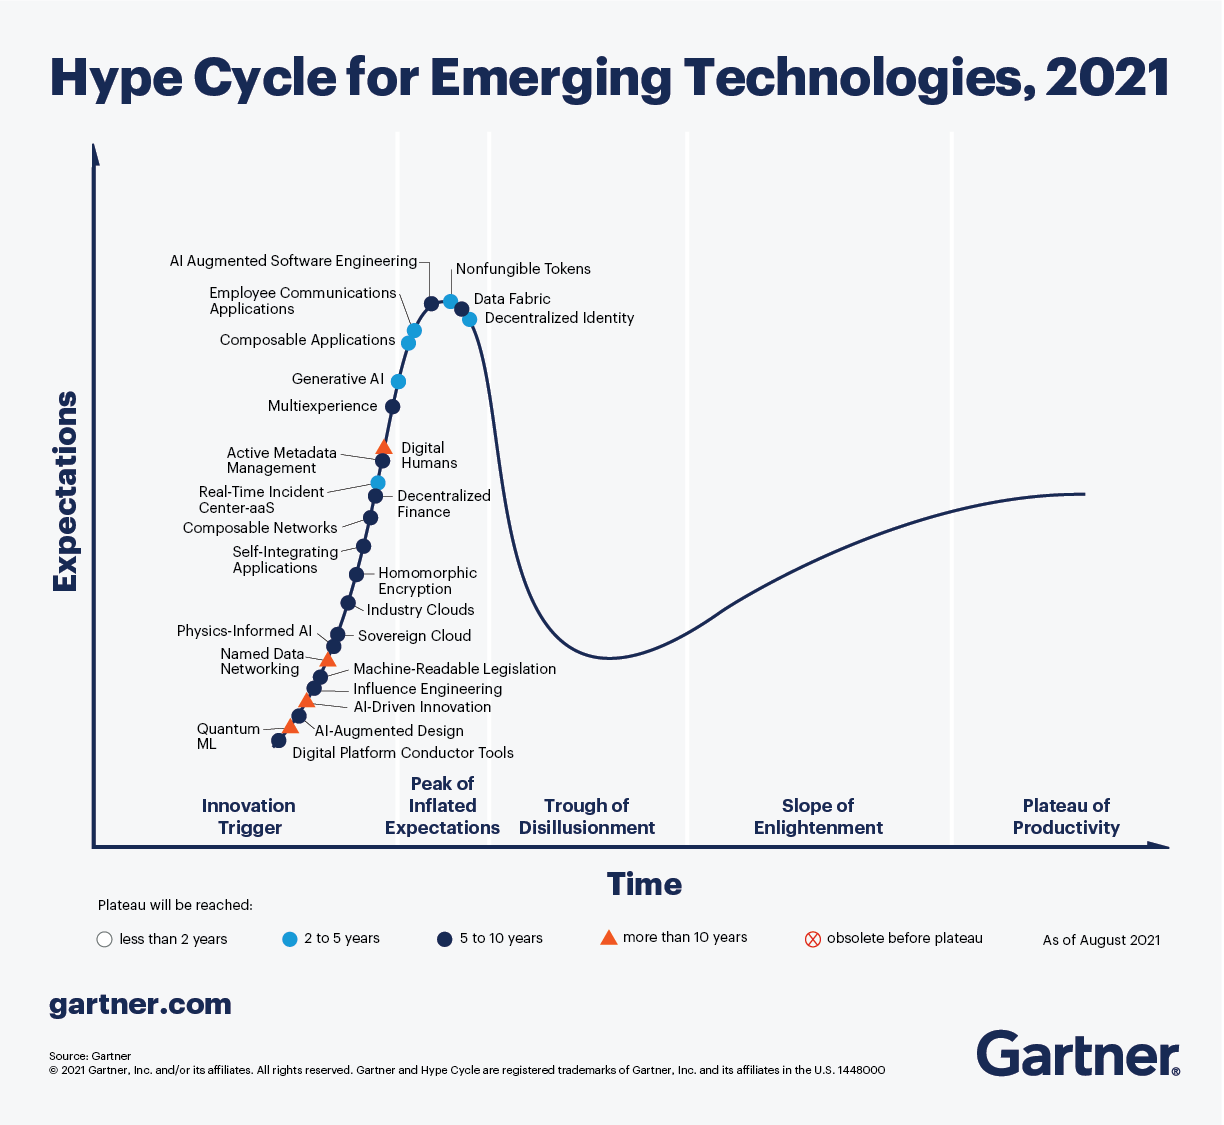 Hype Cycle for Emerging Technologies, 2021